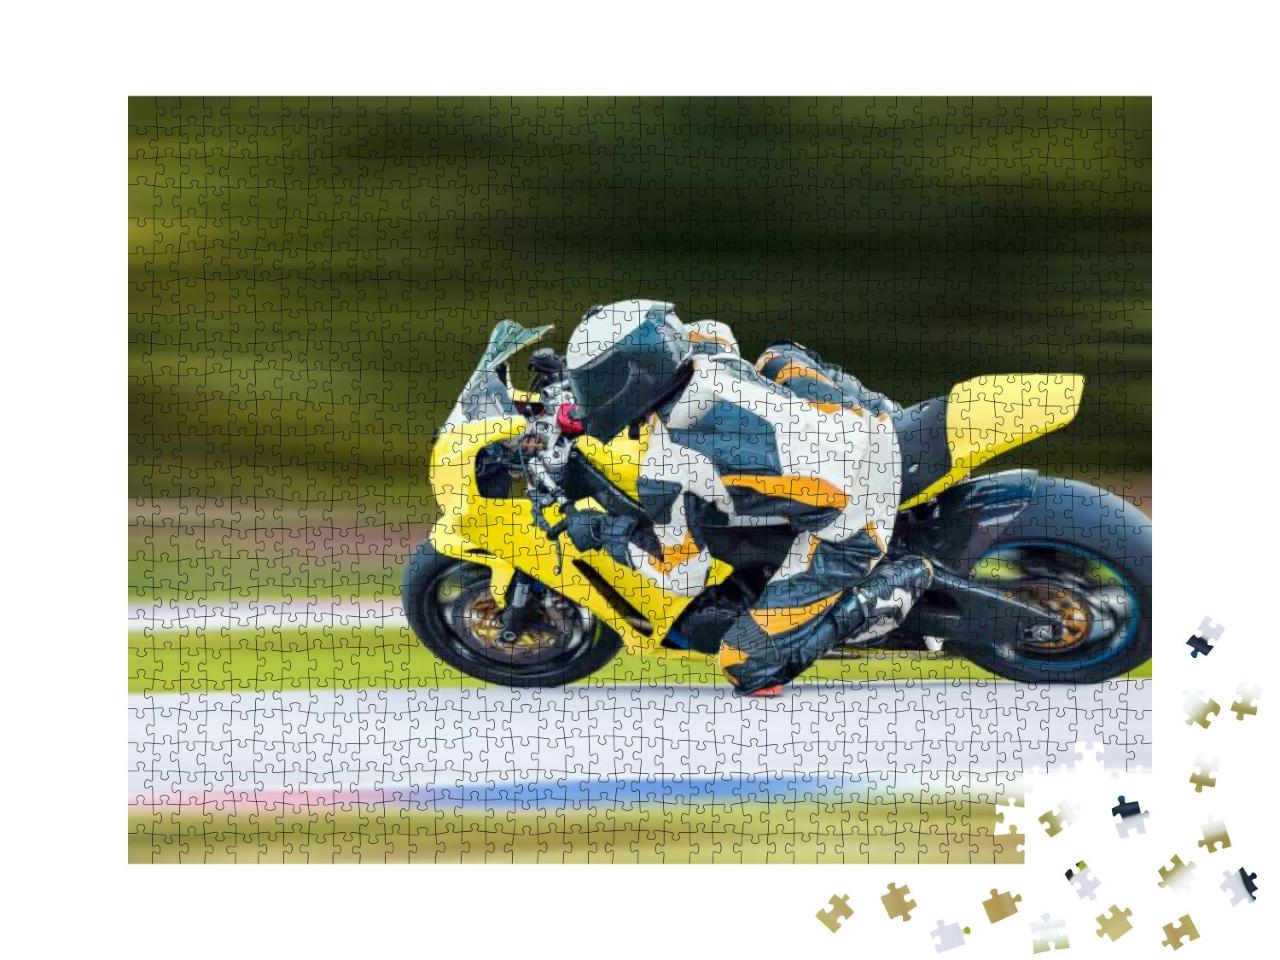 Motorcycle Leaning Into a Fast Corner on Highway... Jigsaw Puzzle with 1000 pieces